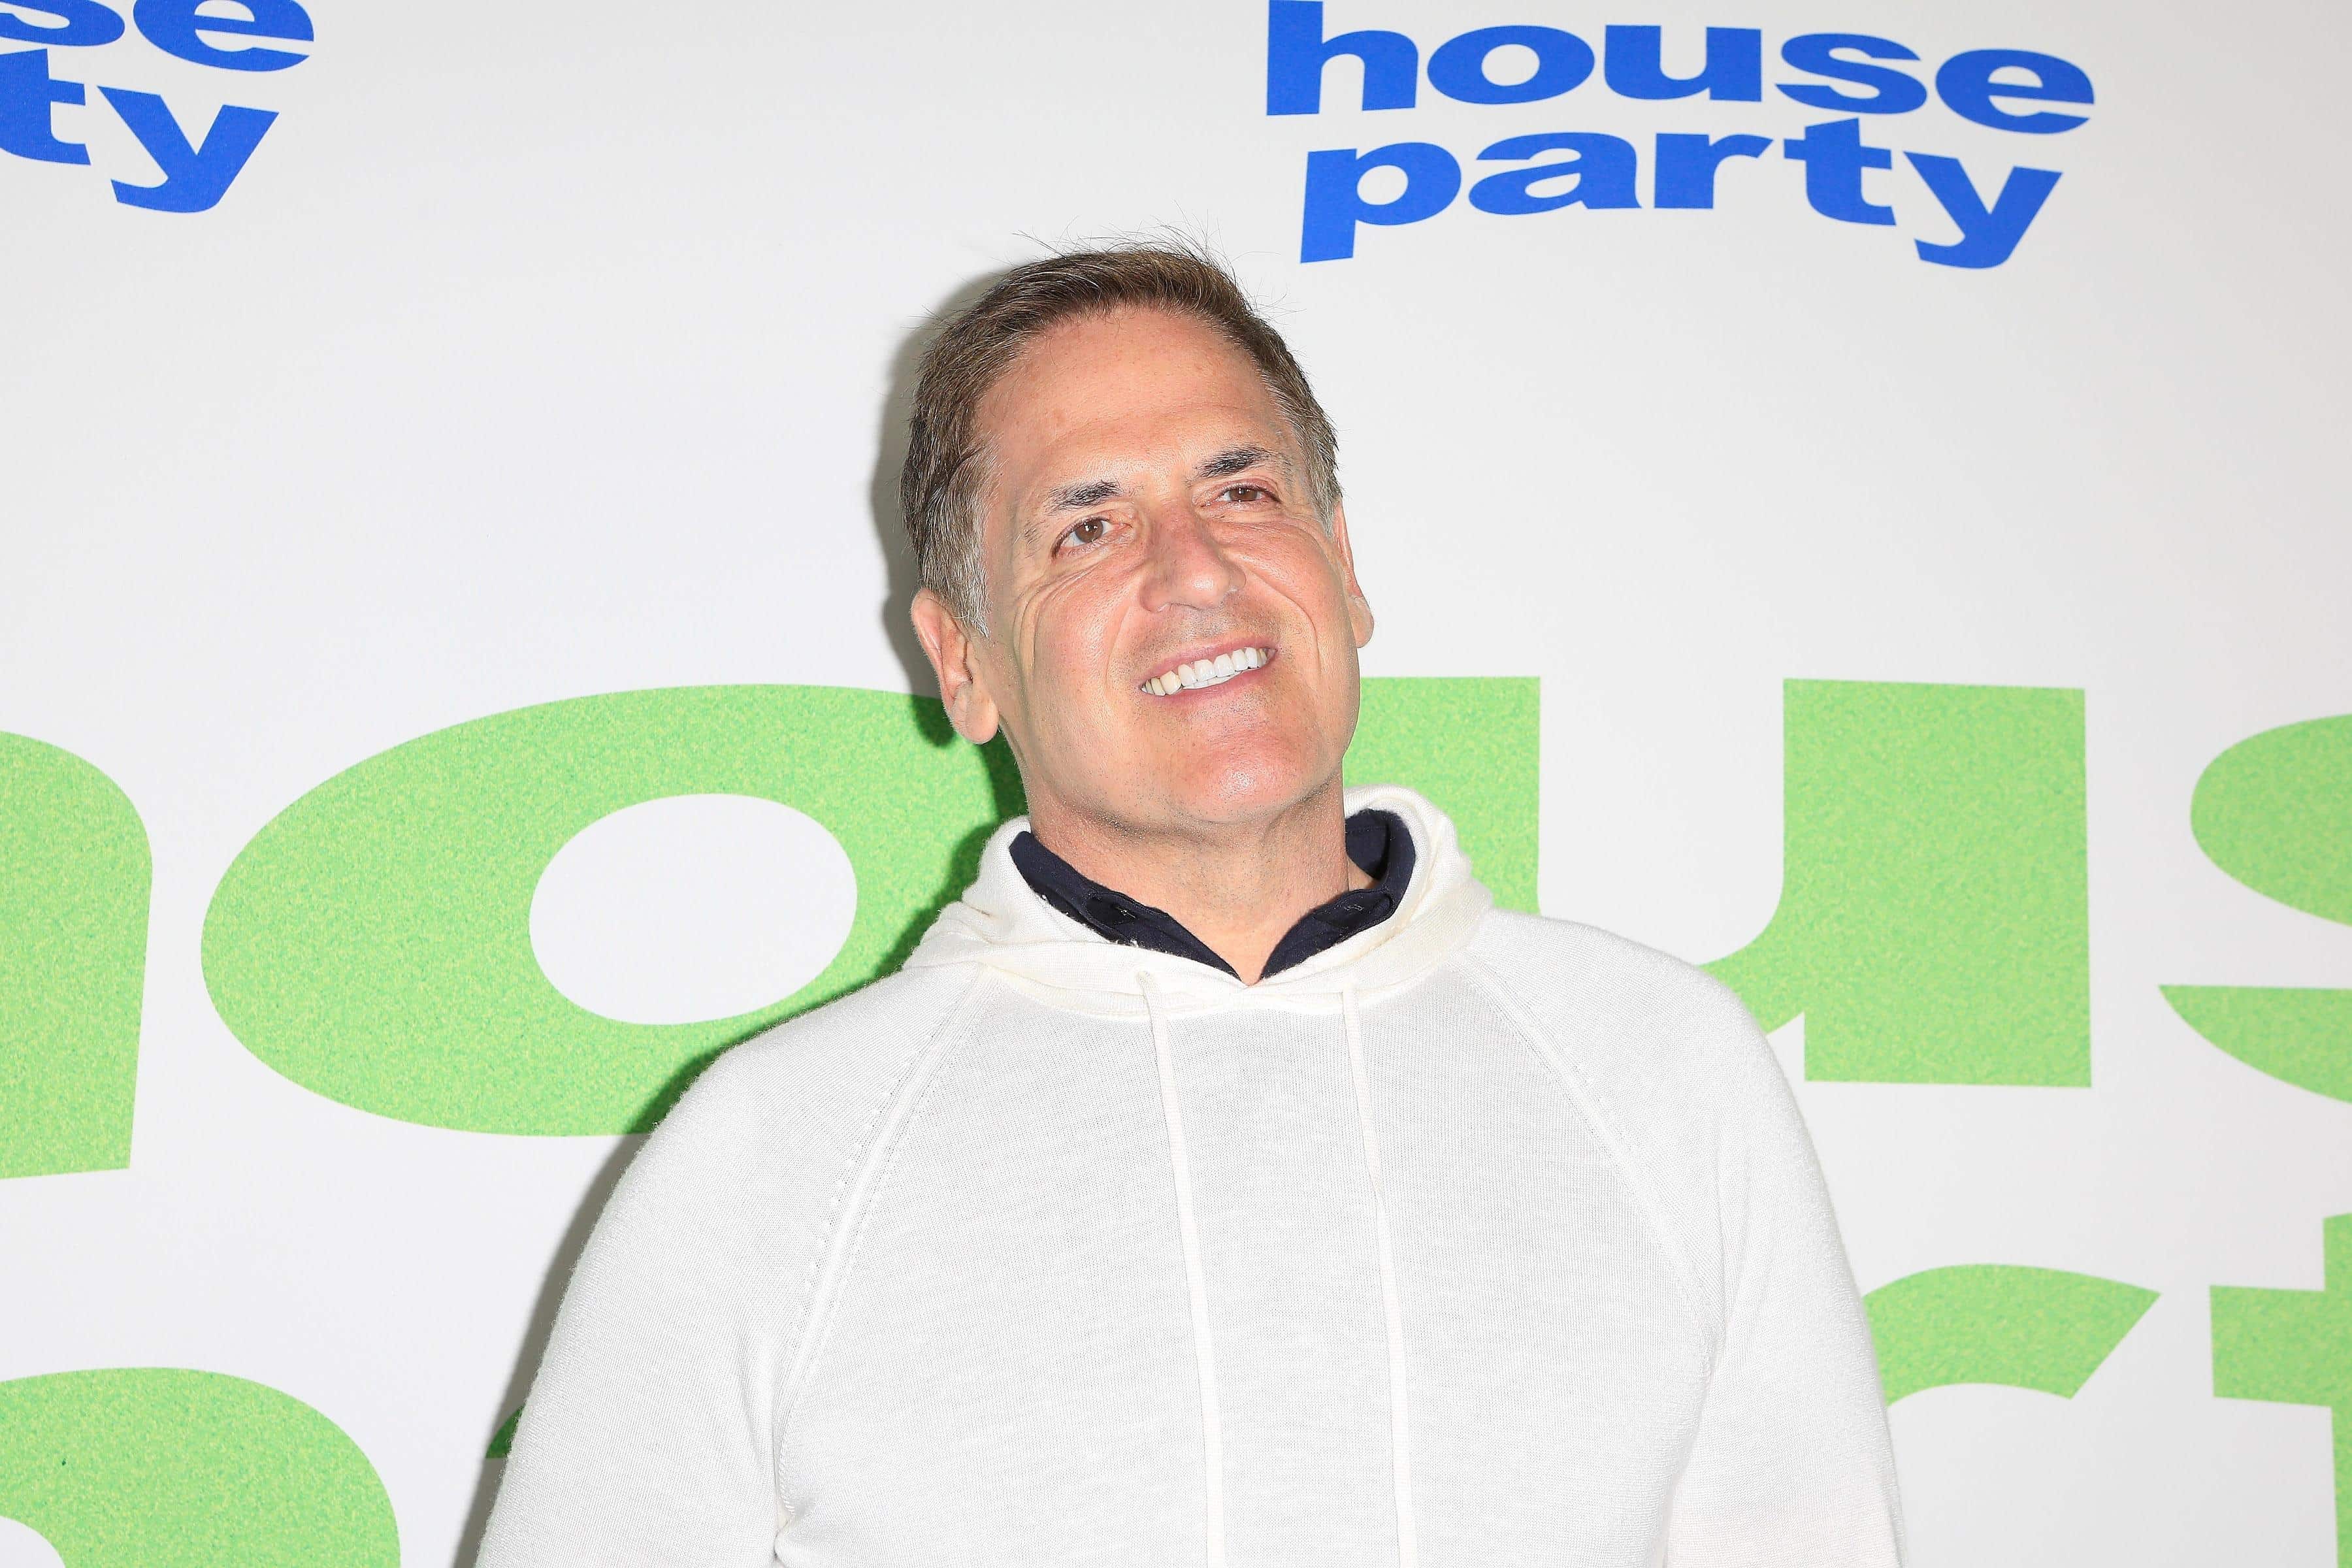 LOS ANGELES - JAN 8: Mark Cuban at the Special Red Carpet Screening for New Line Cinema's House Party at the TCL Chinese 6 Theatres on January 11, 2023 in Los Angeles, CA